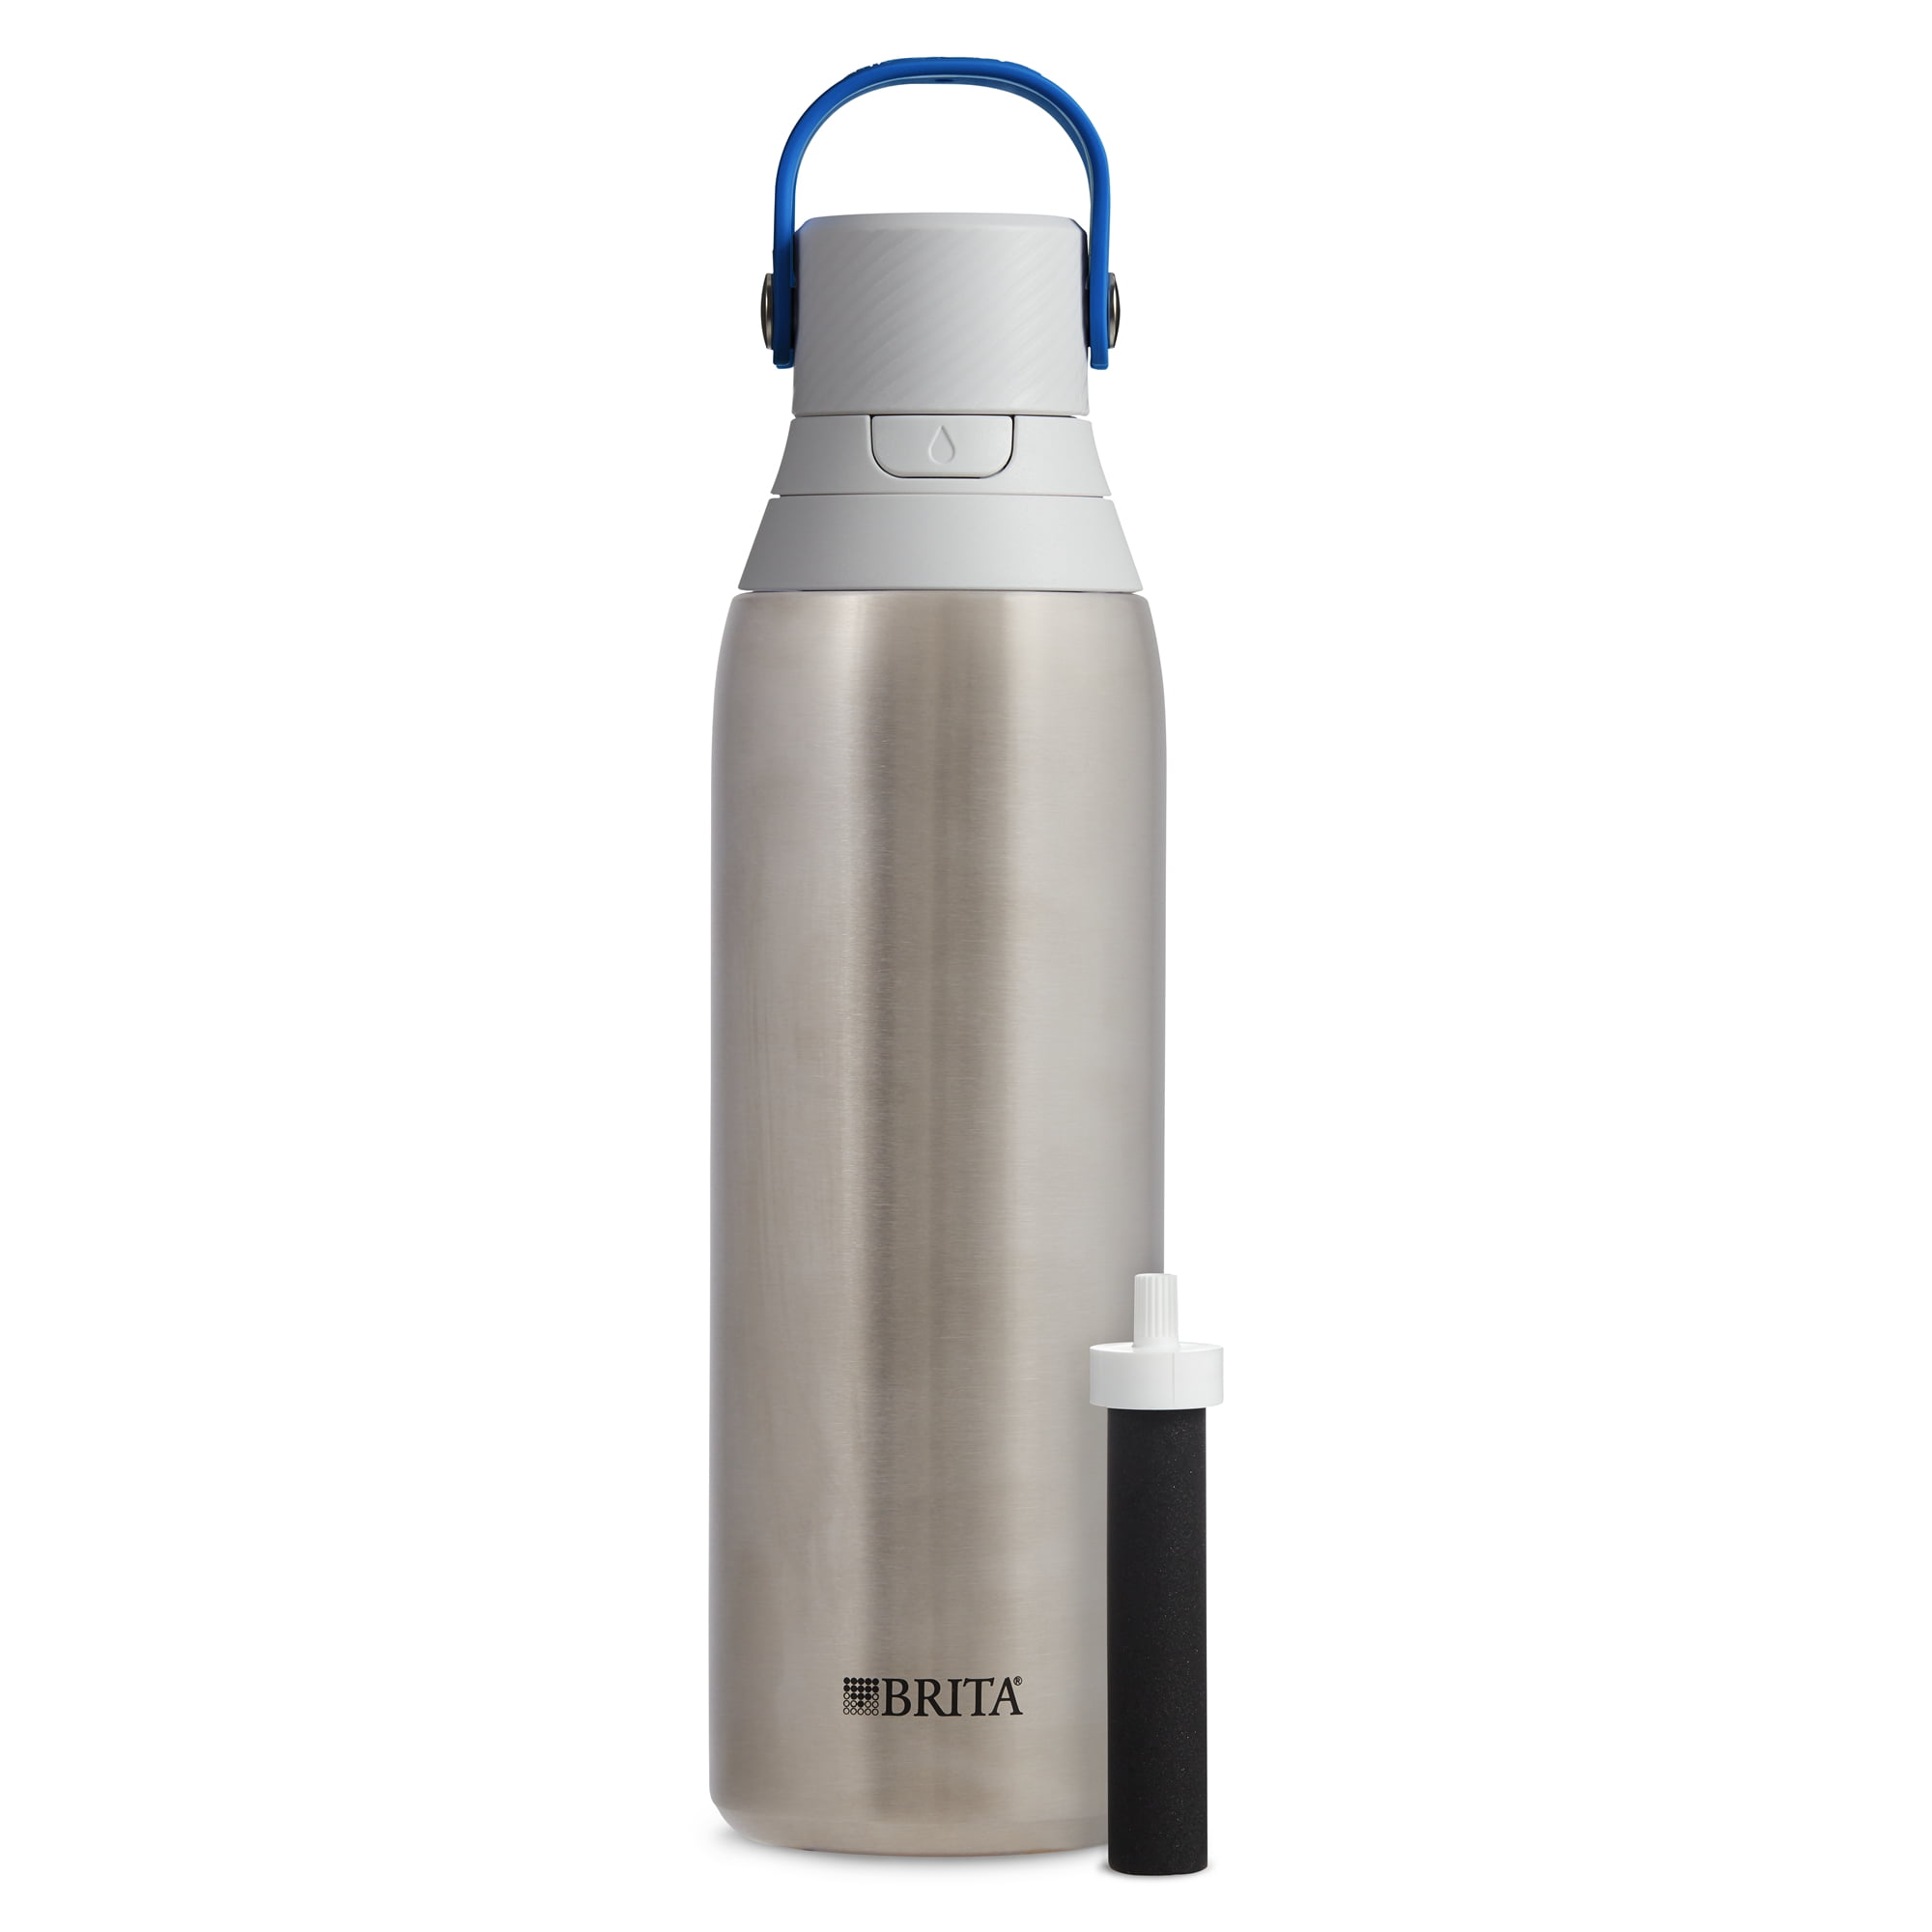 Brita 20 Ounce Premium Filtering Water Bottle with Filter - BPA Free Brita Stainless Steel Water Bottle With Filter